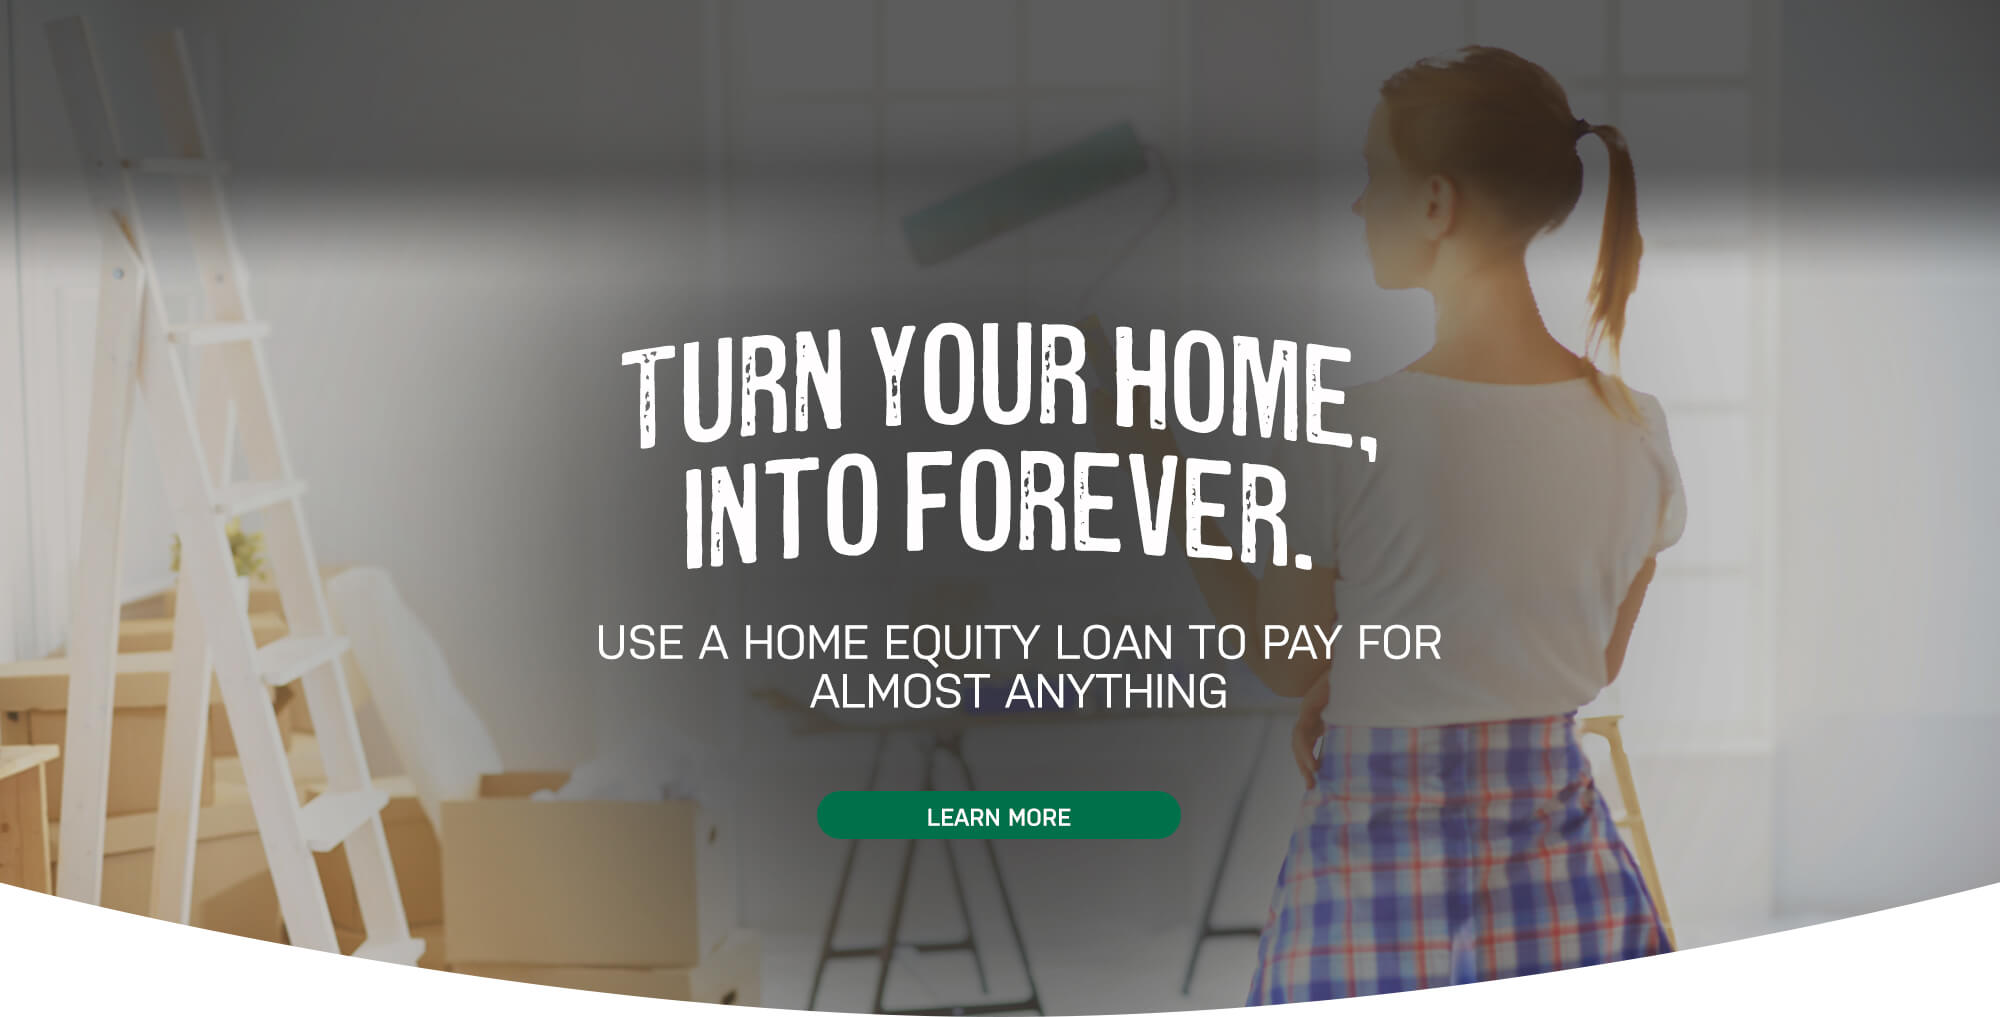 Turn Your Home Into Forever.  Use Your Home Equity to Finance It!  Learn More